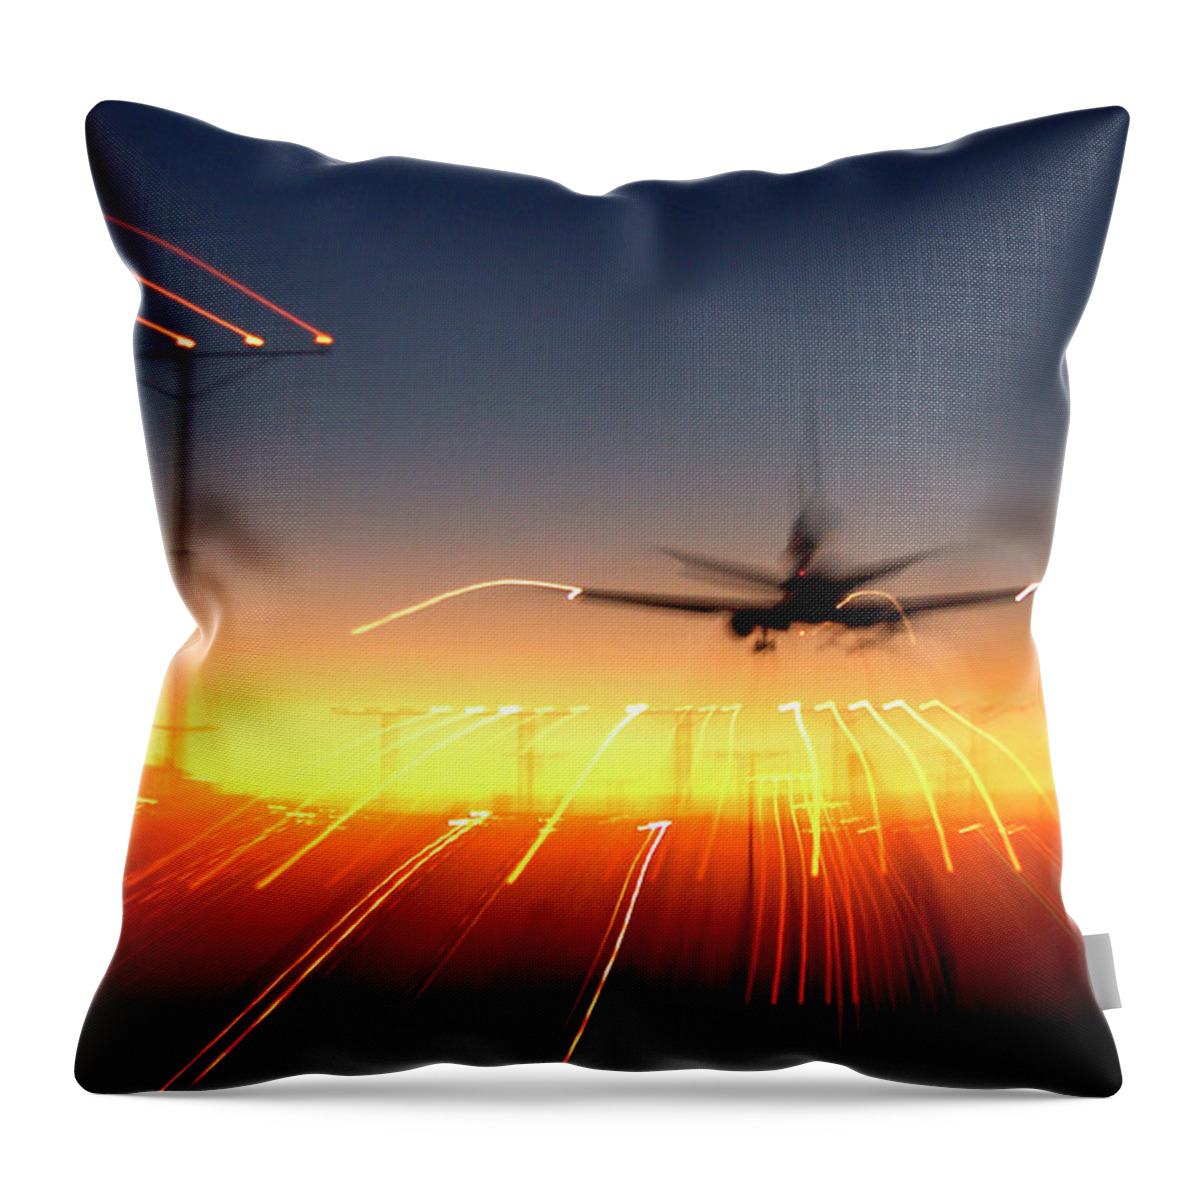 Wind Throw Pillow featuring the photograph Airplane Tarmac At Sunset by Mitch Diamond